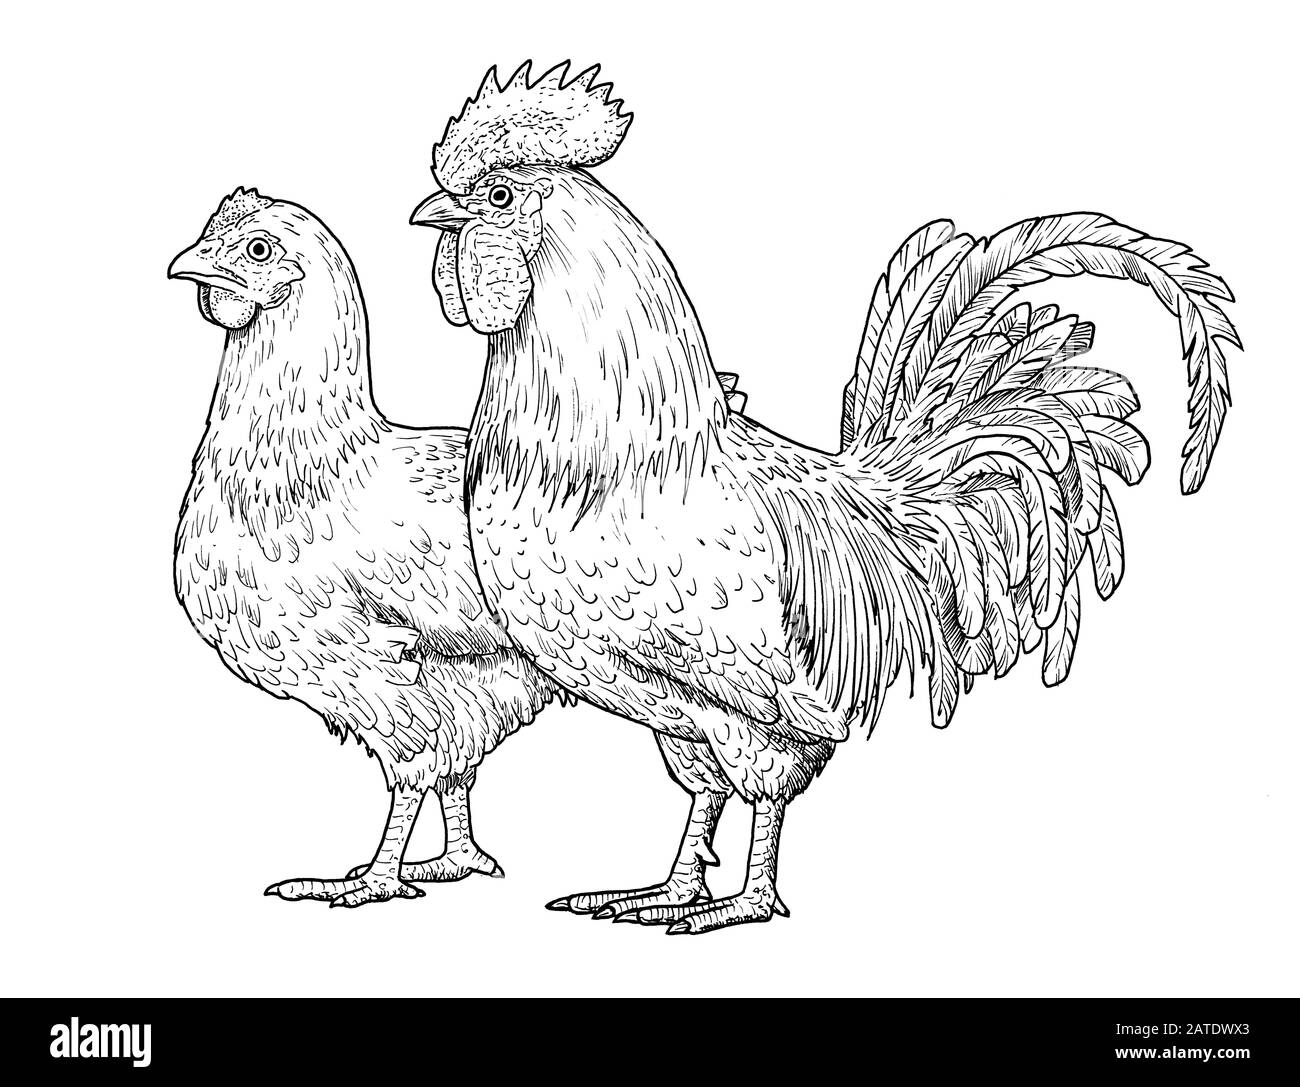 Black and white sketch of a chicken on Craiyon